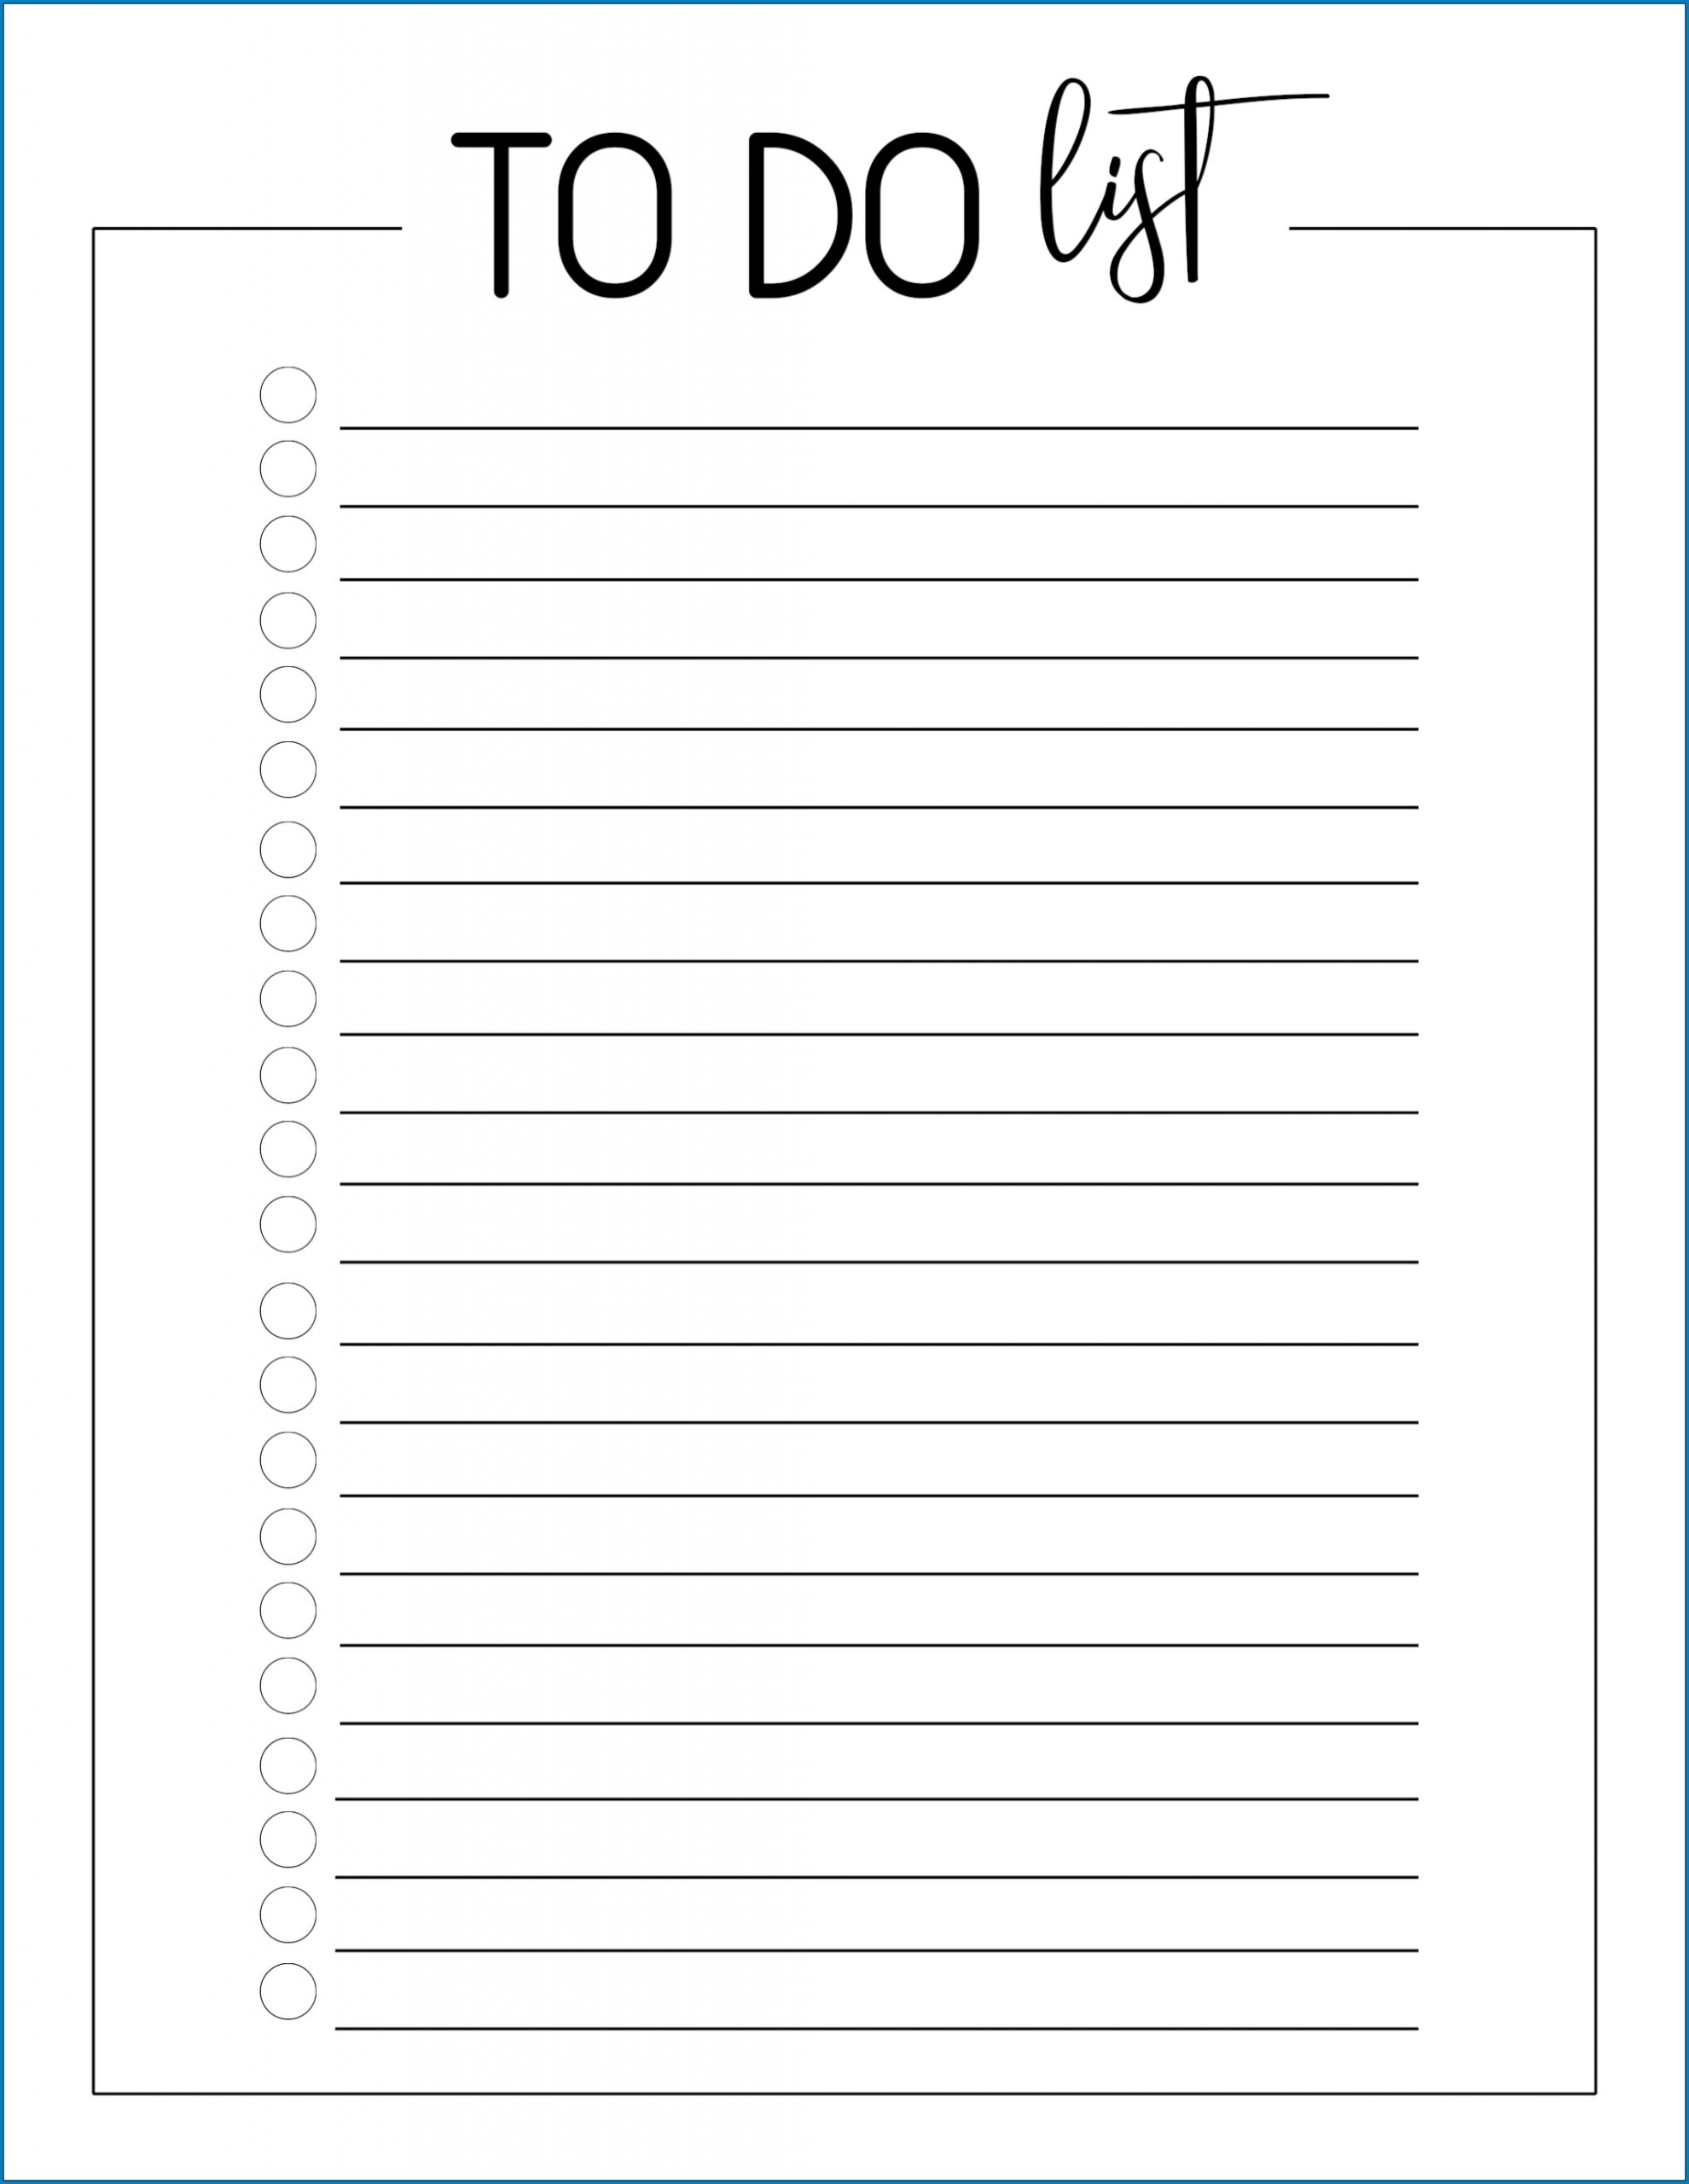 √ Free To Do List Printable Template | Templateral à To Do List À Imprimer